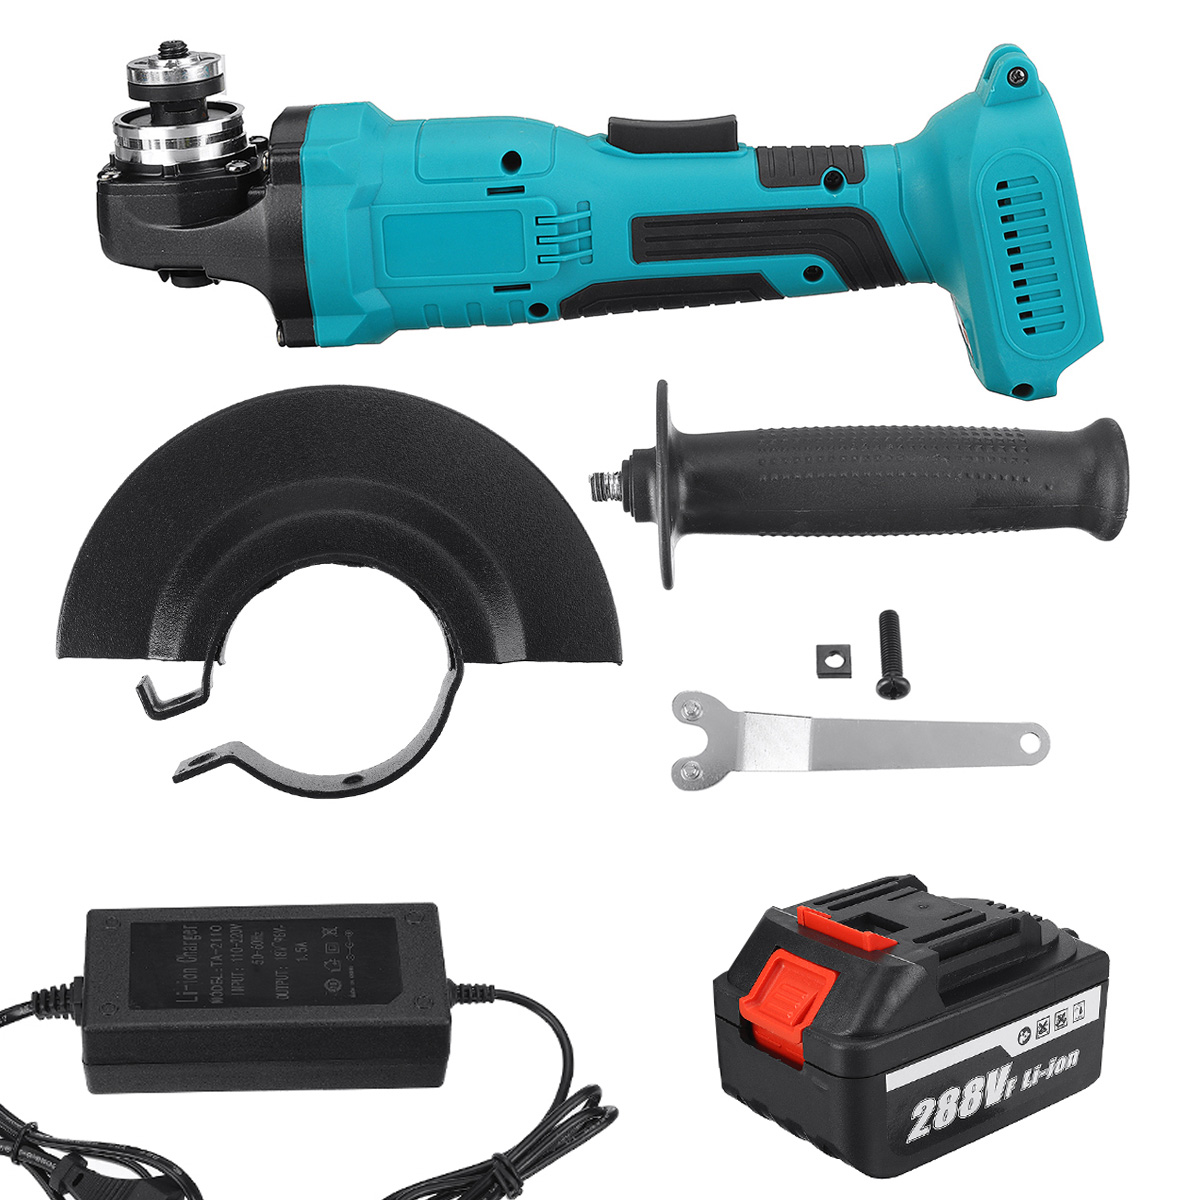 100125mm-Brushless-Cordless-Angle-Grinder-Polisher-Cutting-Tool-W-None12-Battery-For-Makiita-1867833-7